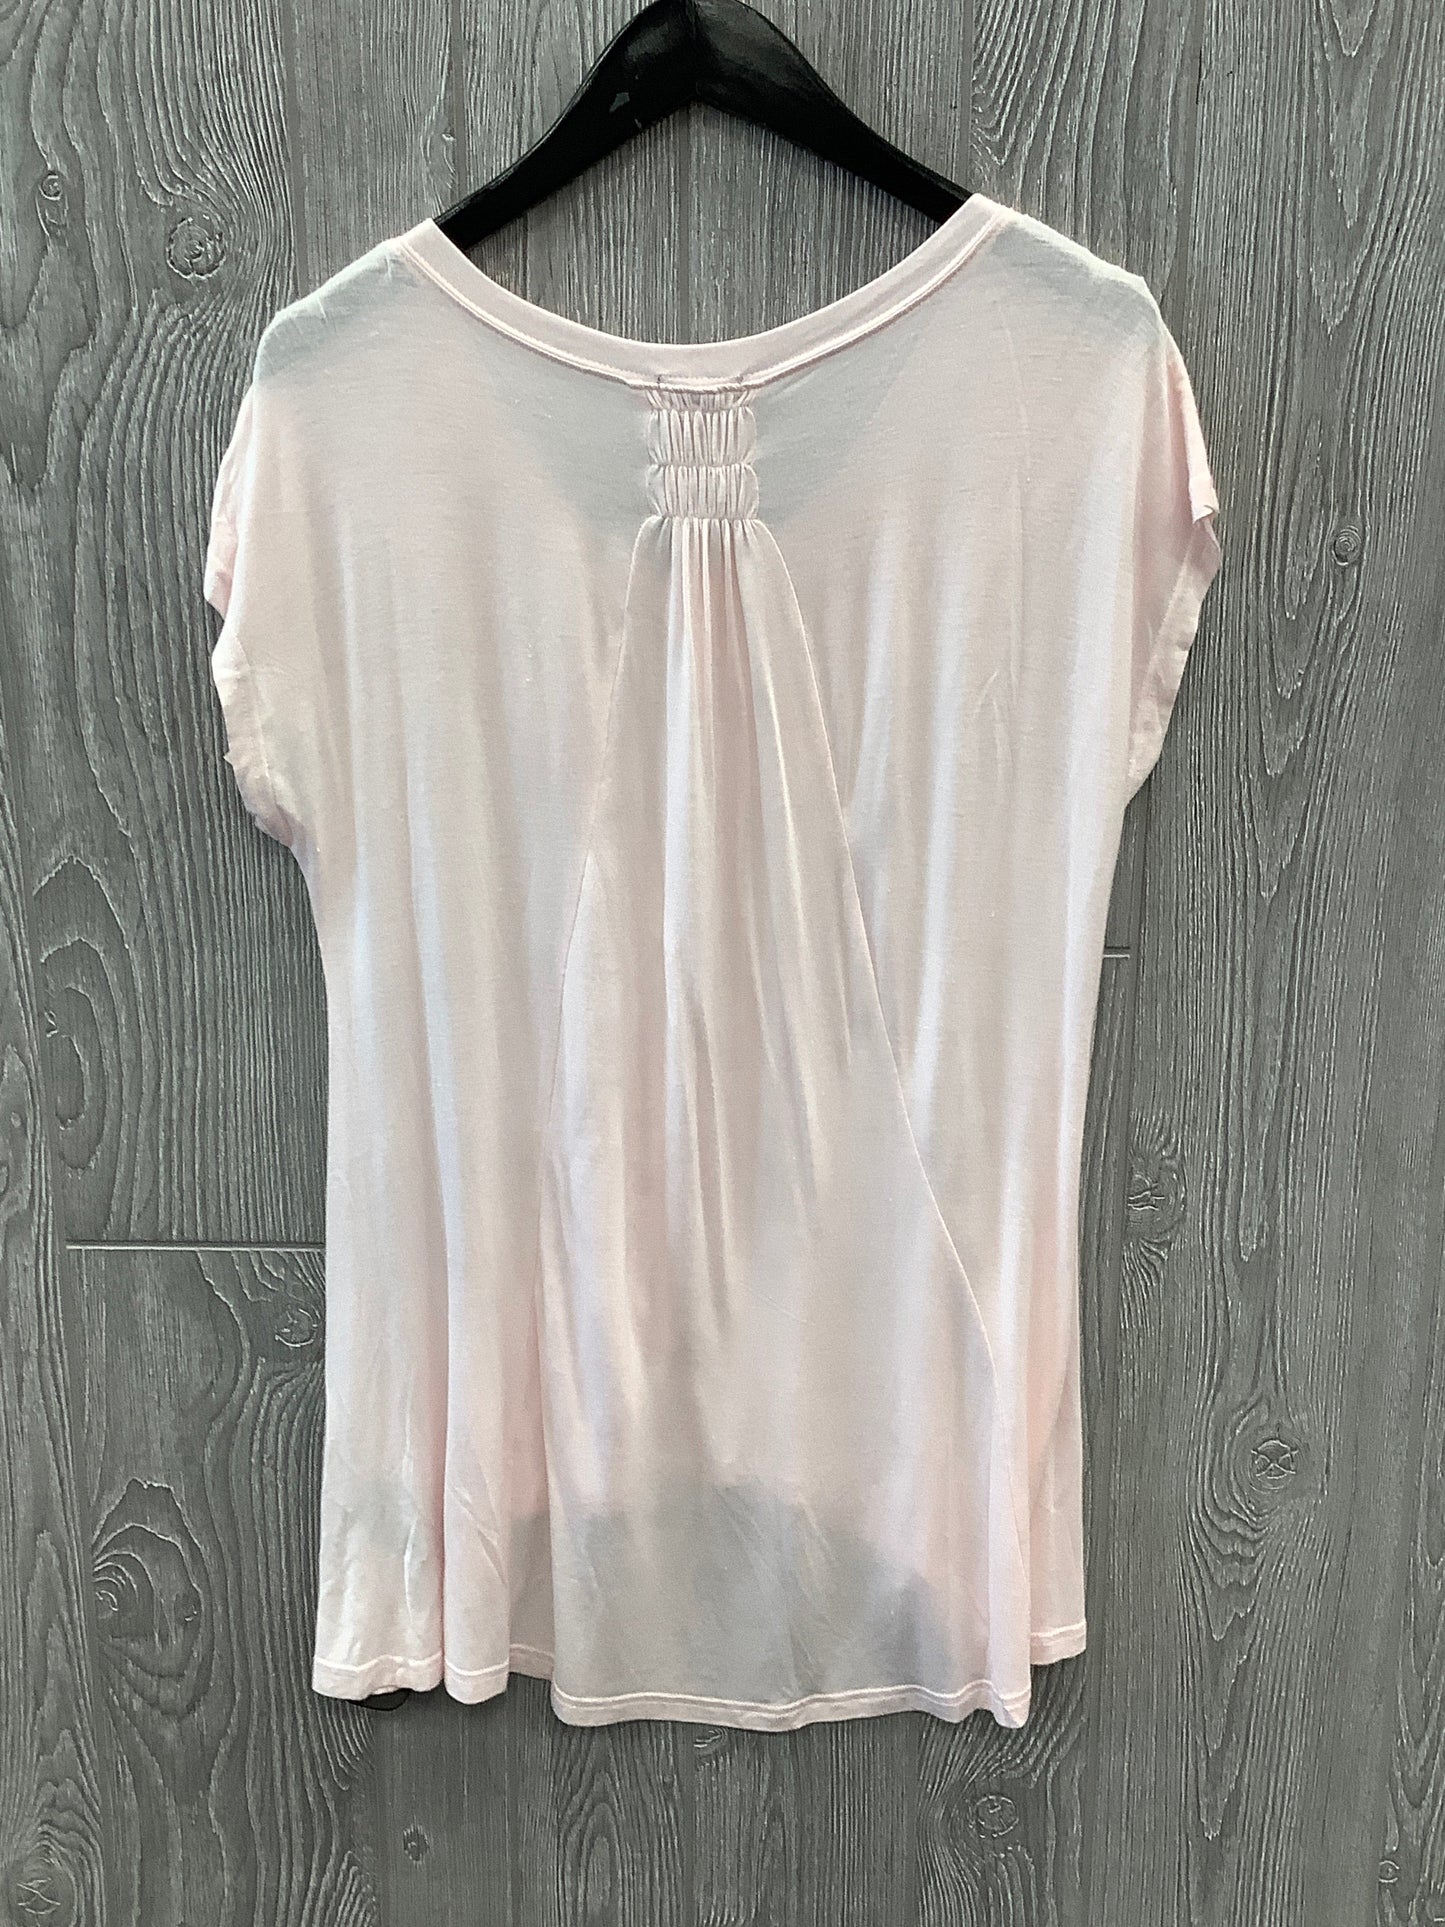 Top Short Sleeve By Hannah  Size: S